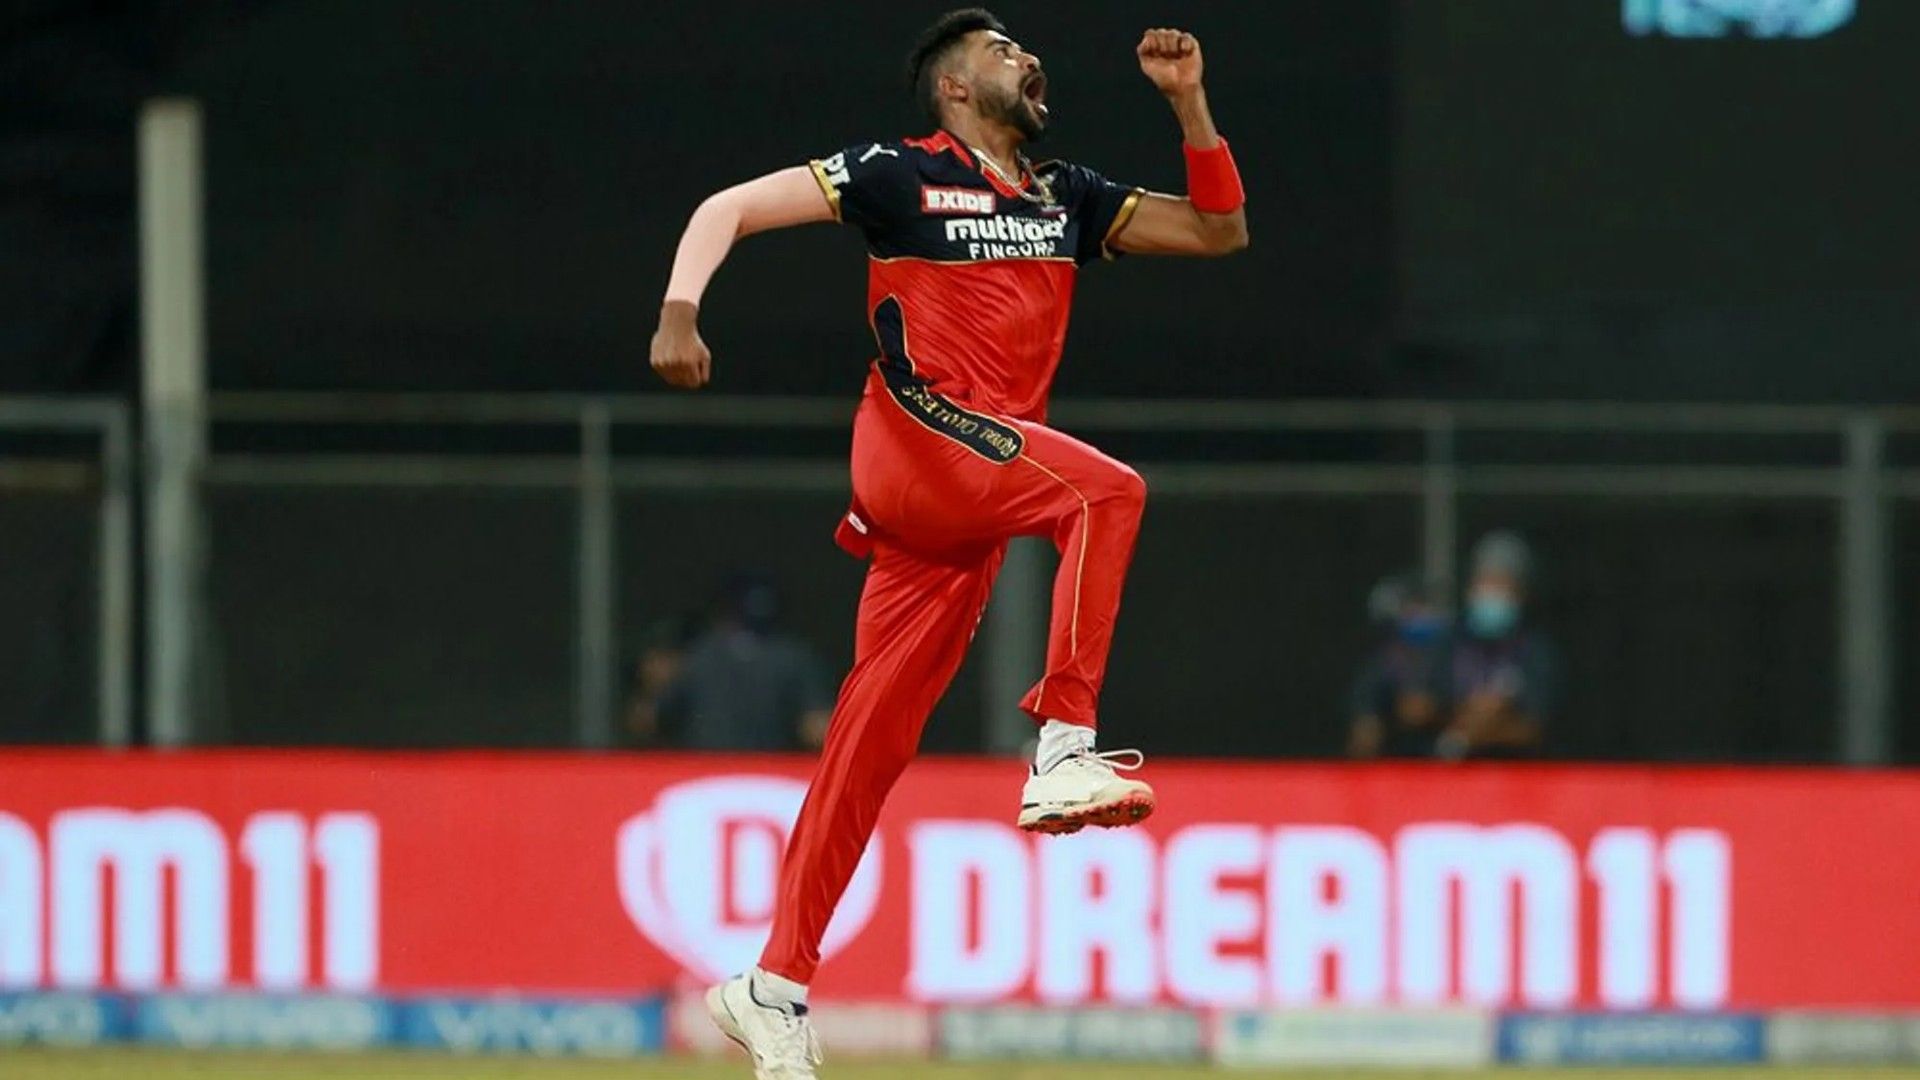 Mohammed Siraj celebrates getting a wicket. (Image: BCCI/IPL)